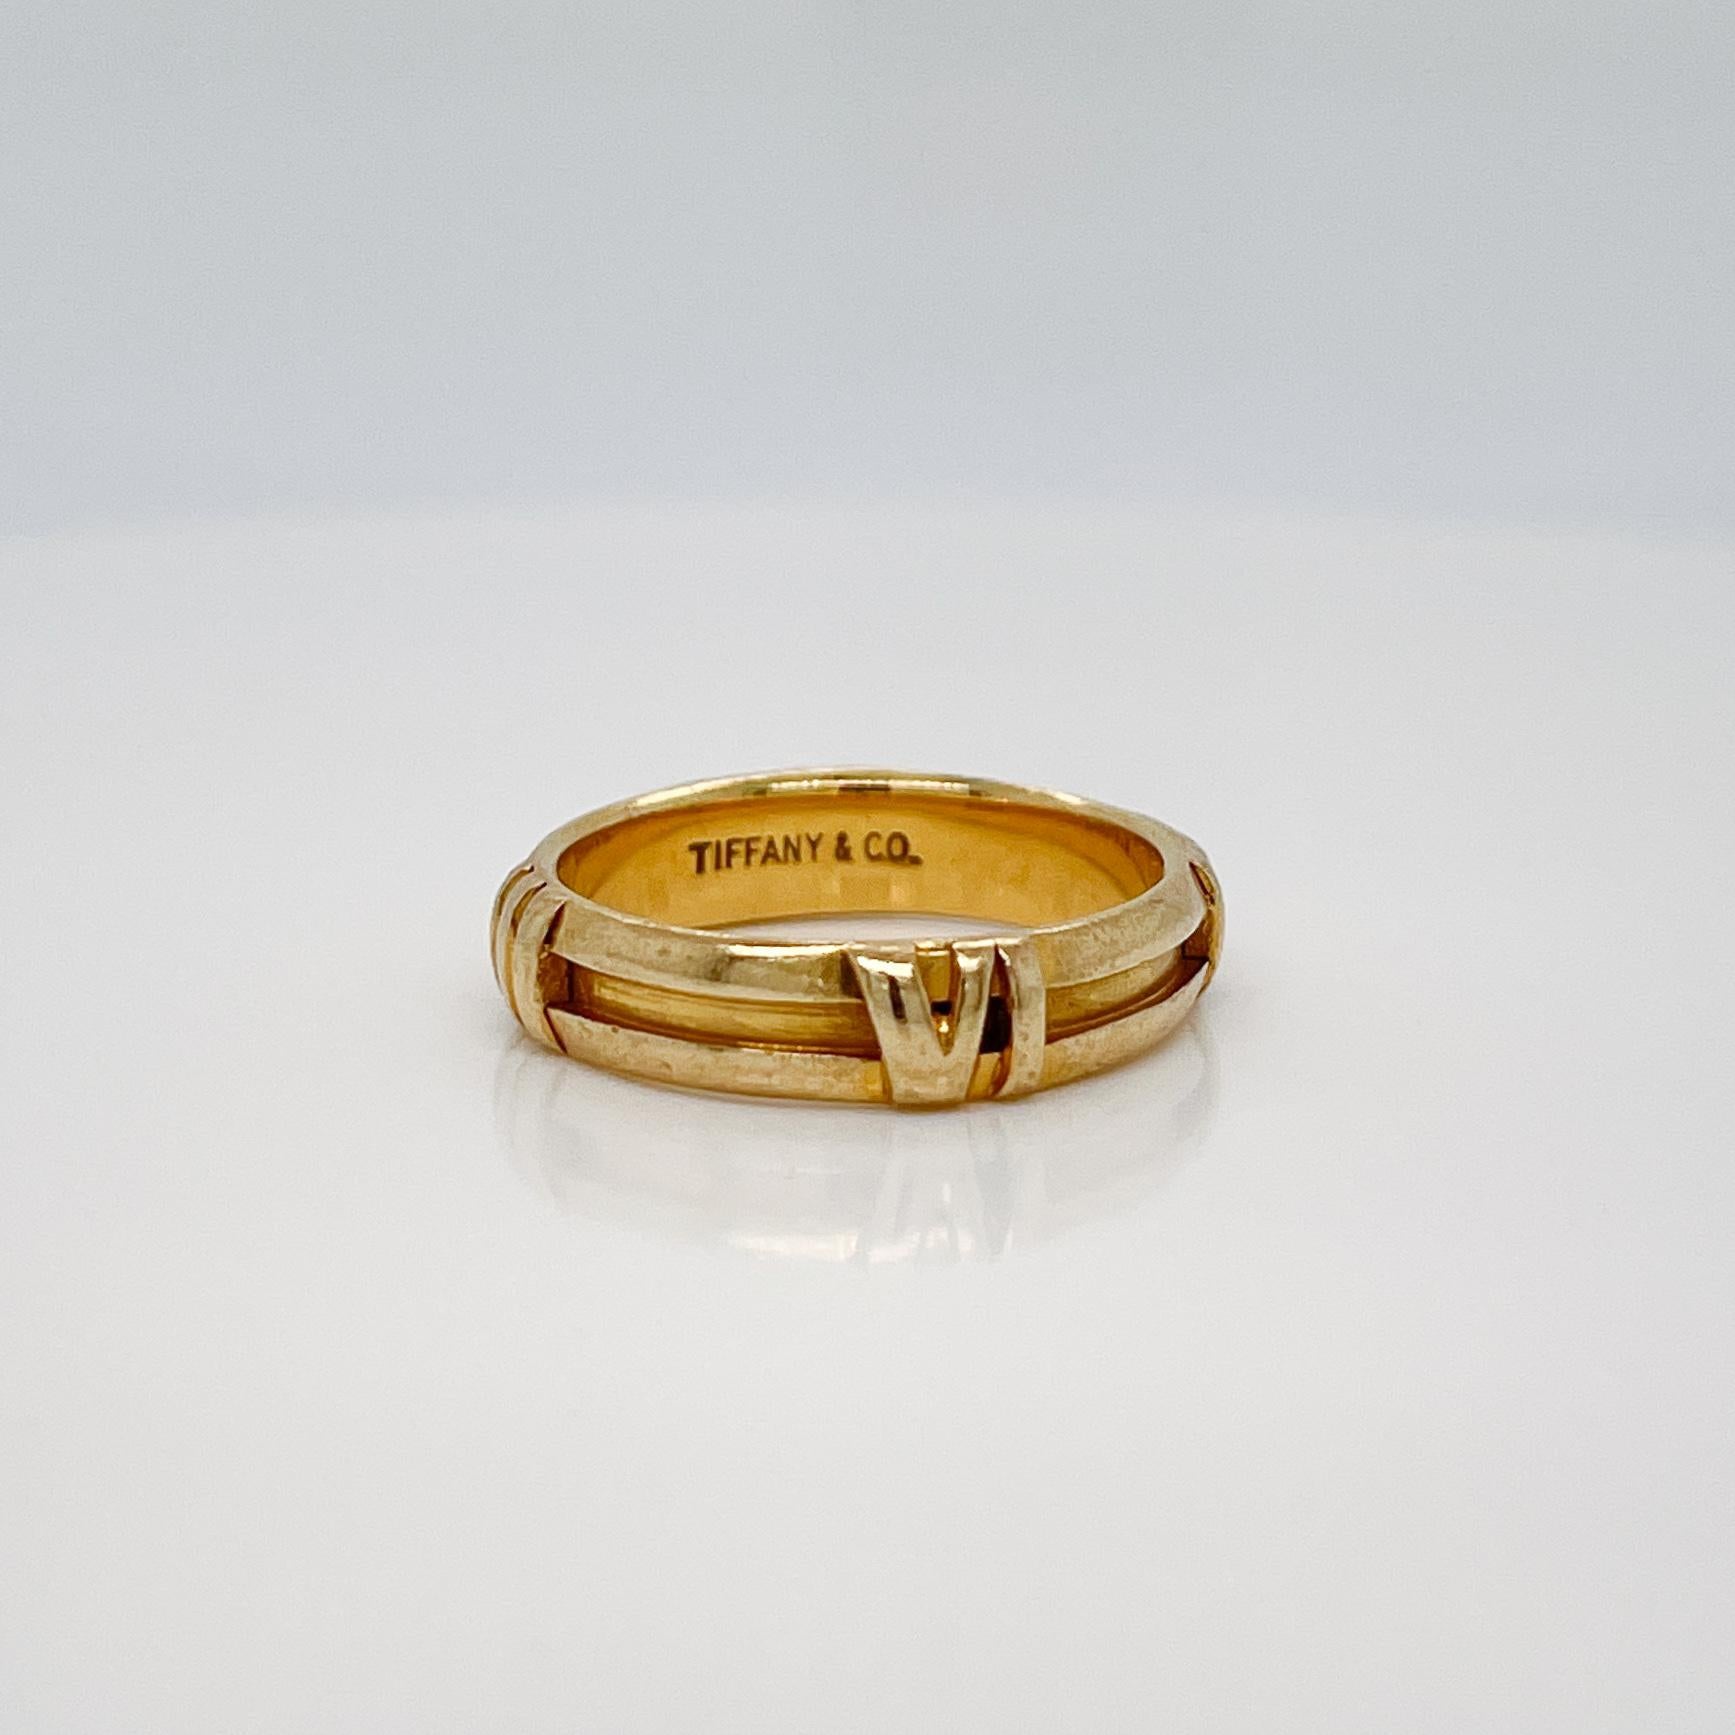 A very fine Atlas ring.

By Tiffany & Co.

In 18k yellow gold with raised Roman numerals around the ring's circumference.

The 'Atlas' collection was designed by John Loring in the 1980's and has come to be one of Tiffany's most successful